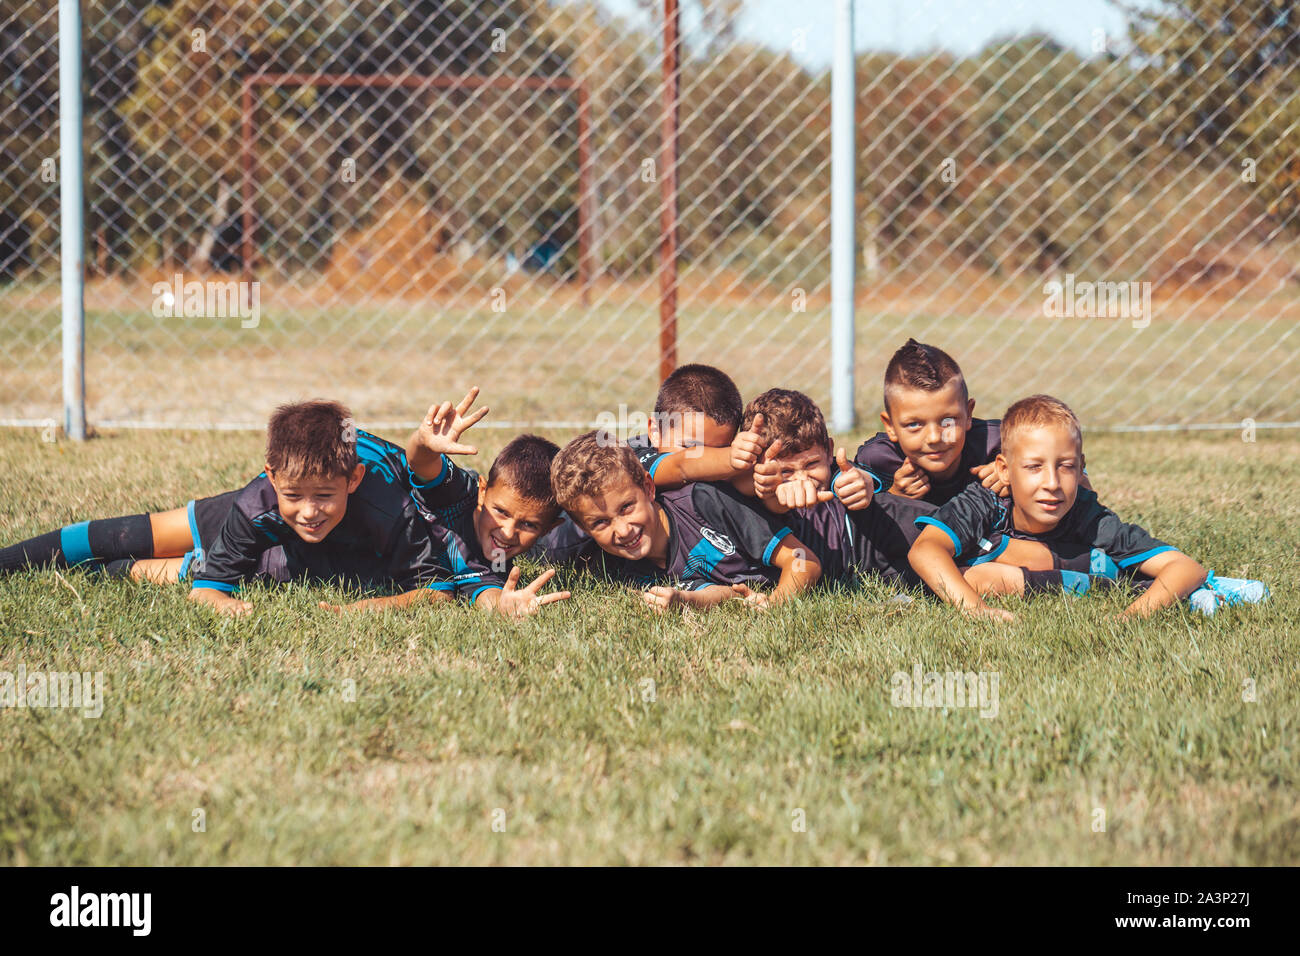 Kids soccer football - young children players celebrating victory together while lying on grass. Stock Photo